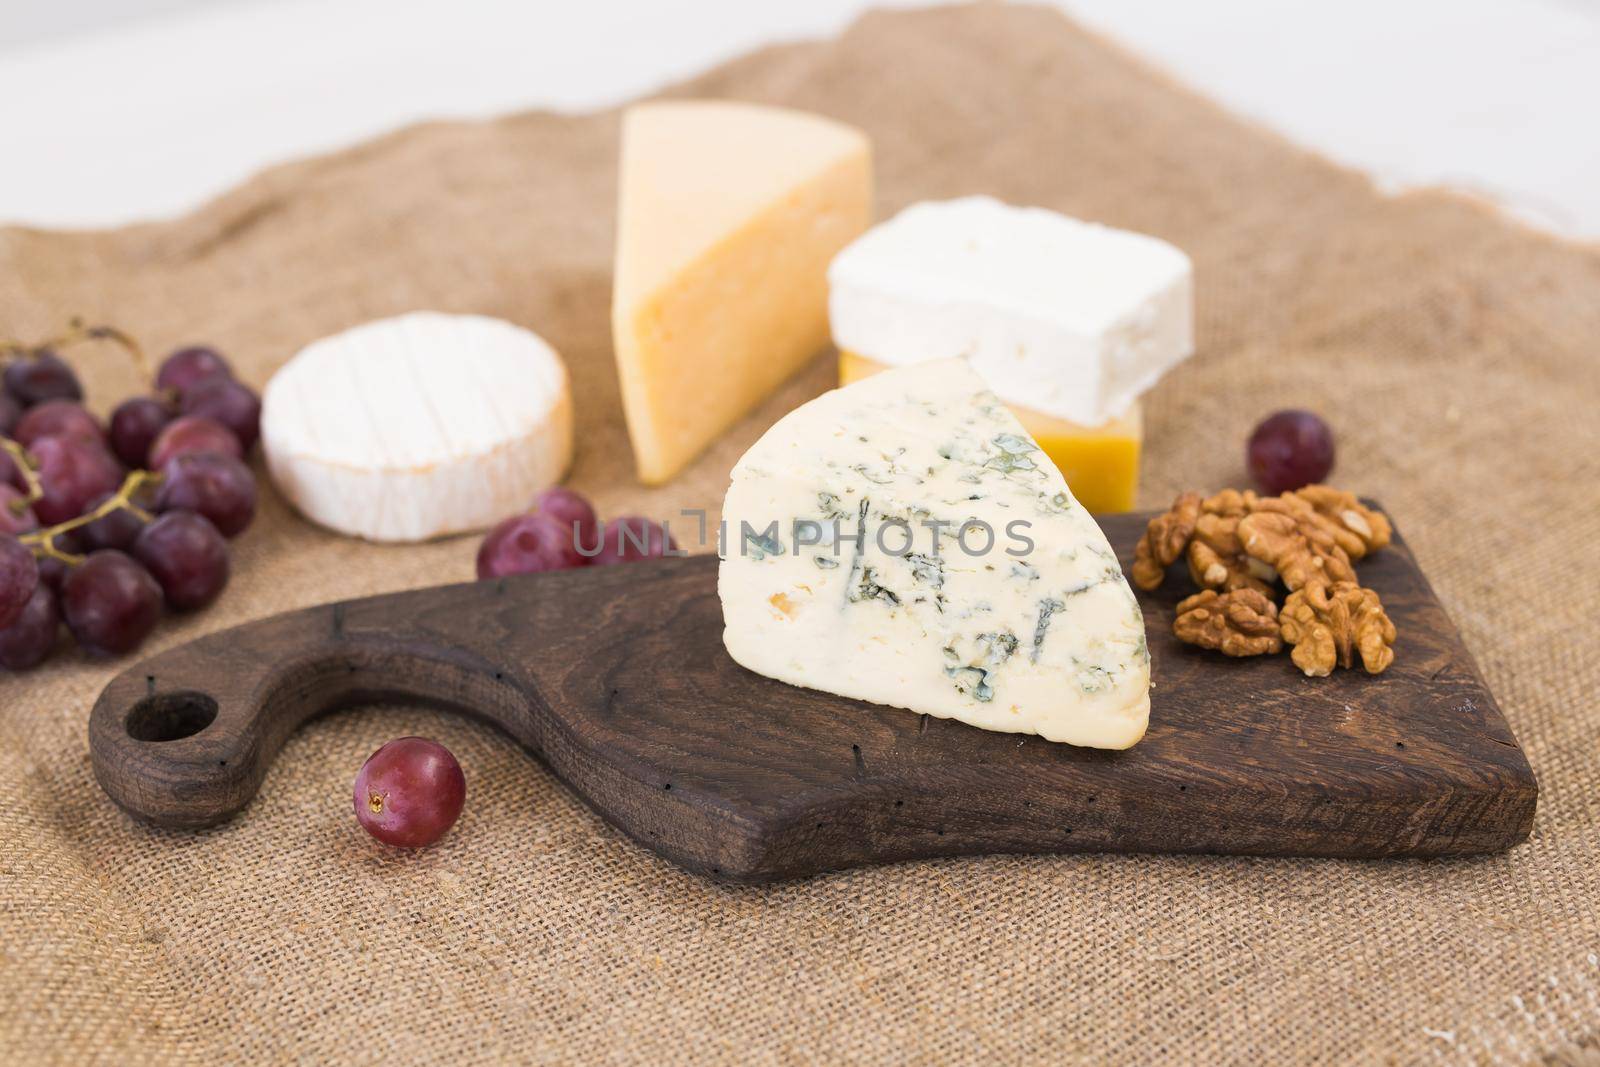 Various types of cheese, blue cheese and brie with grapes and nuts.